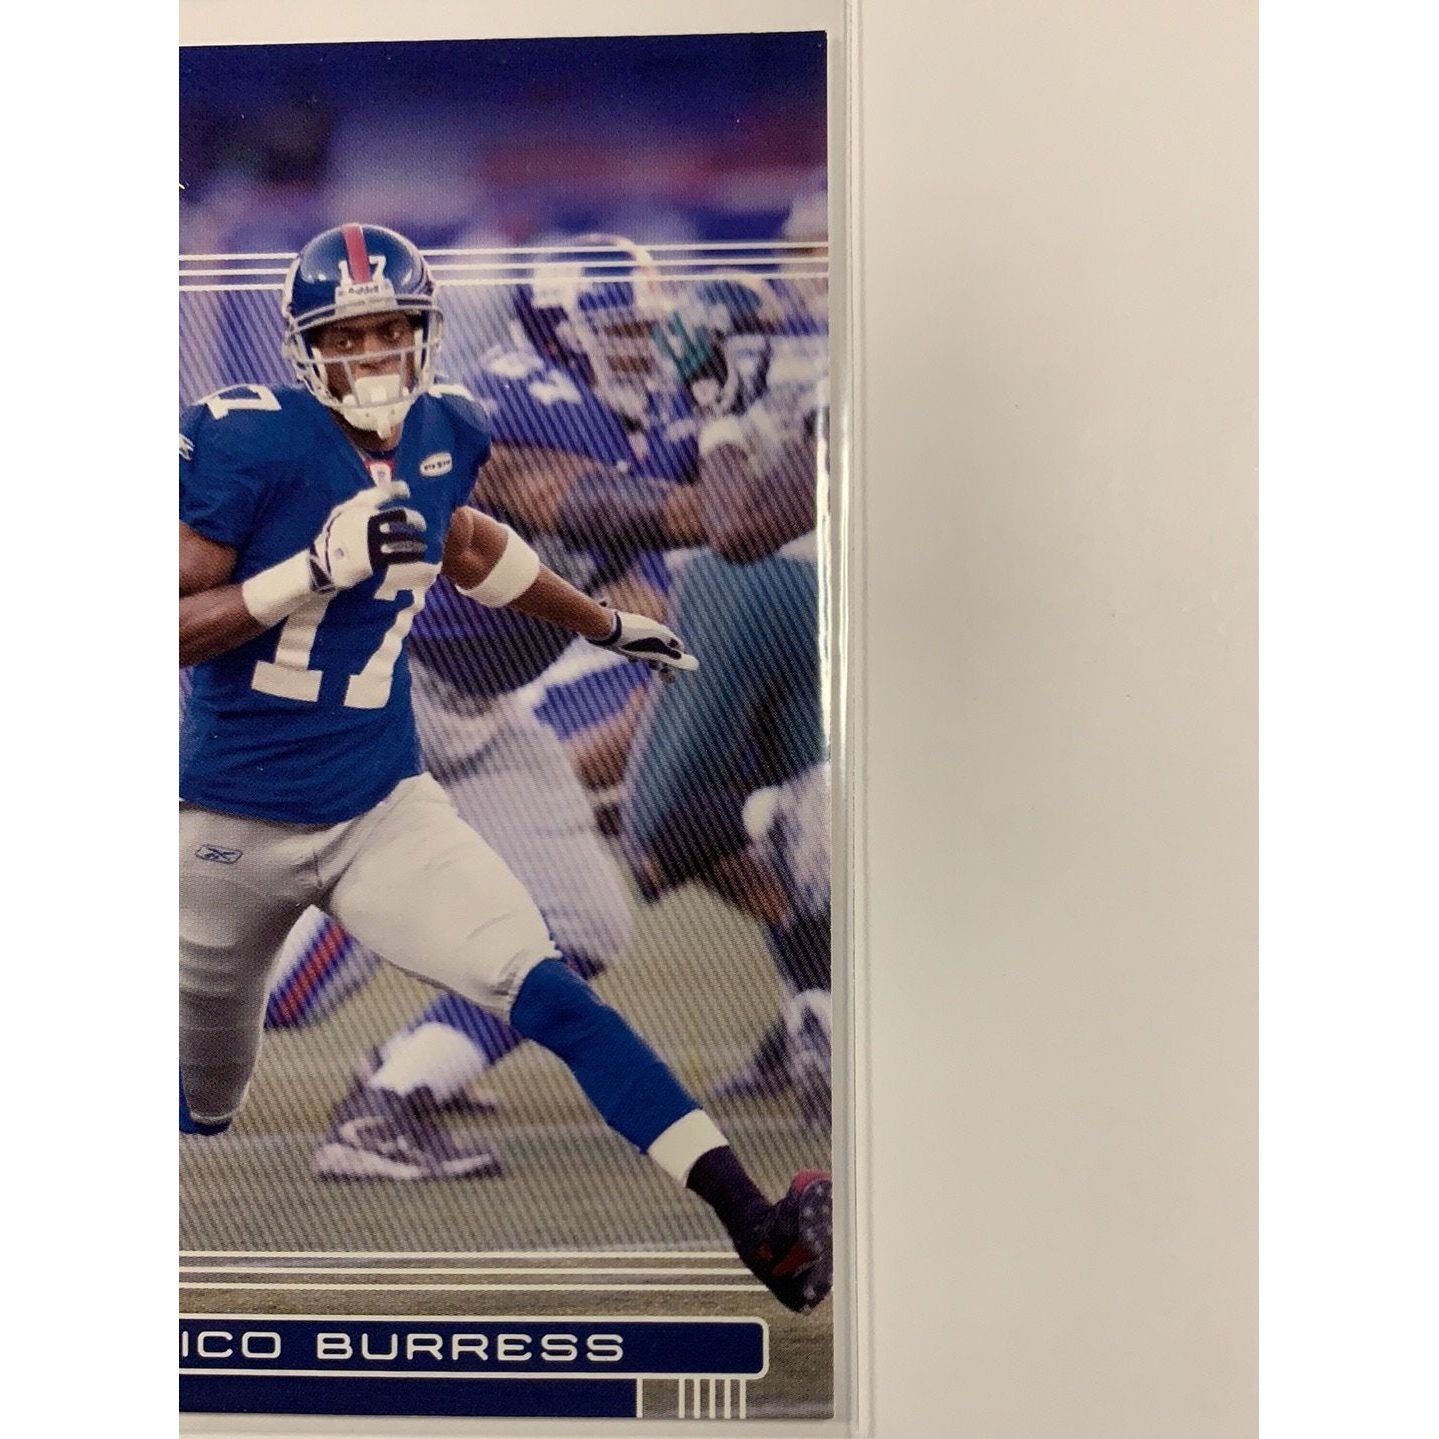  2006 Donruss Playoff Plaxico Burress Base #105  Local Legends Cards & Collectibles